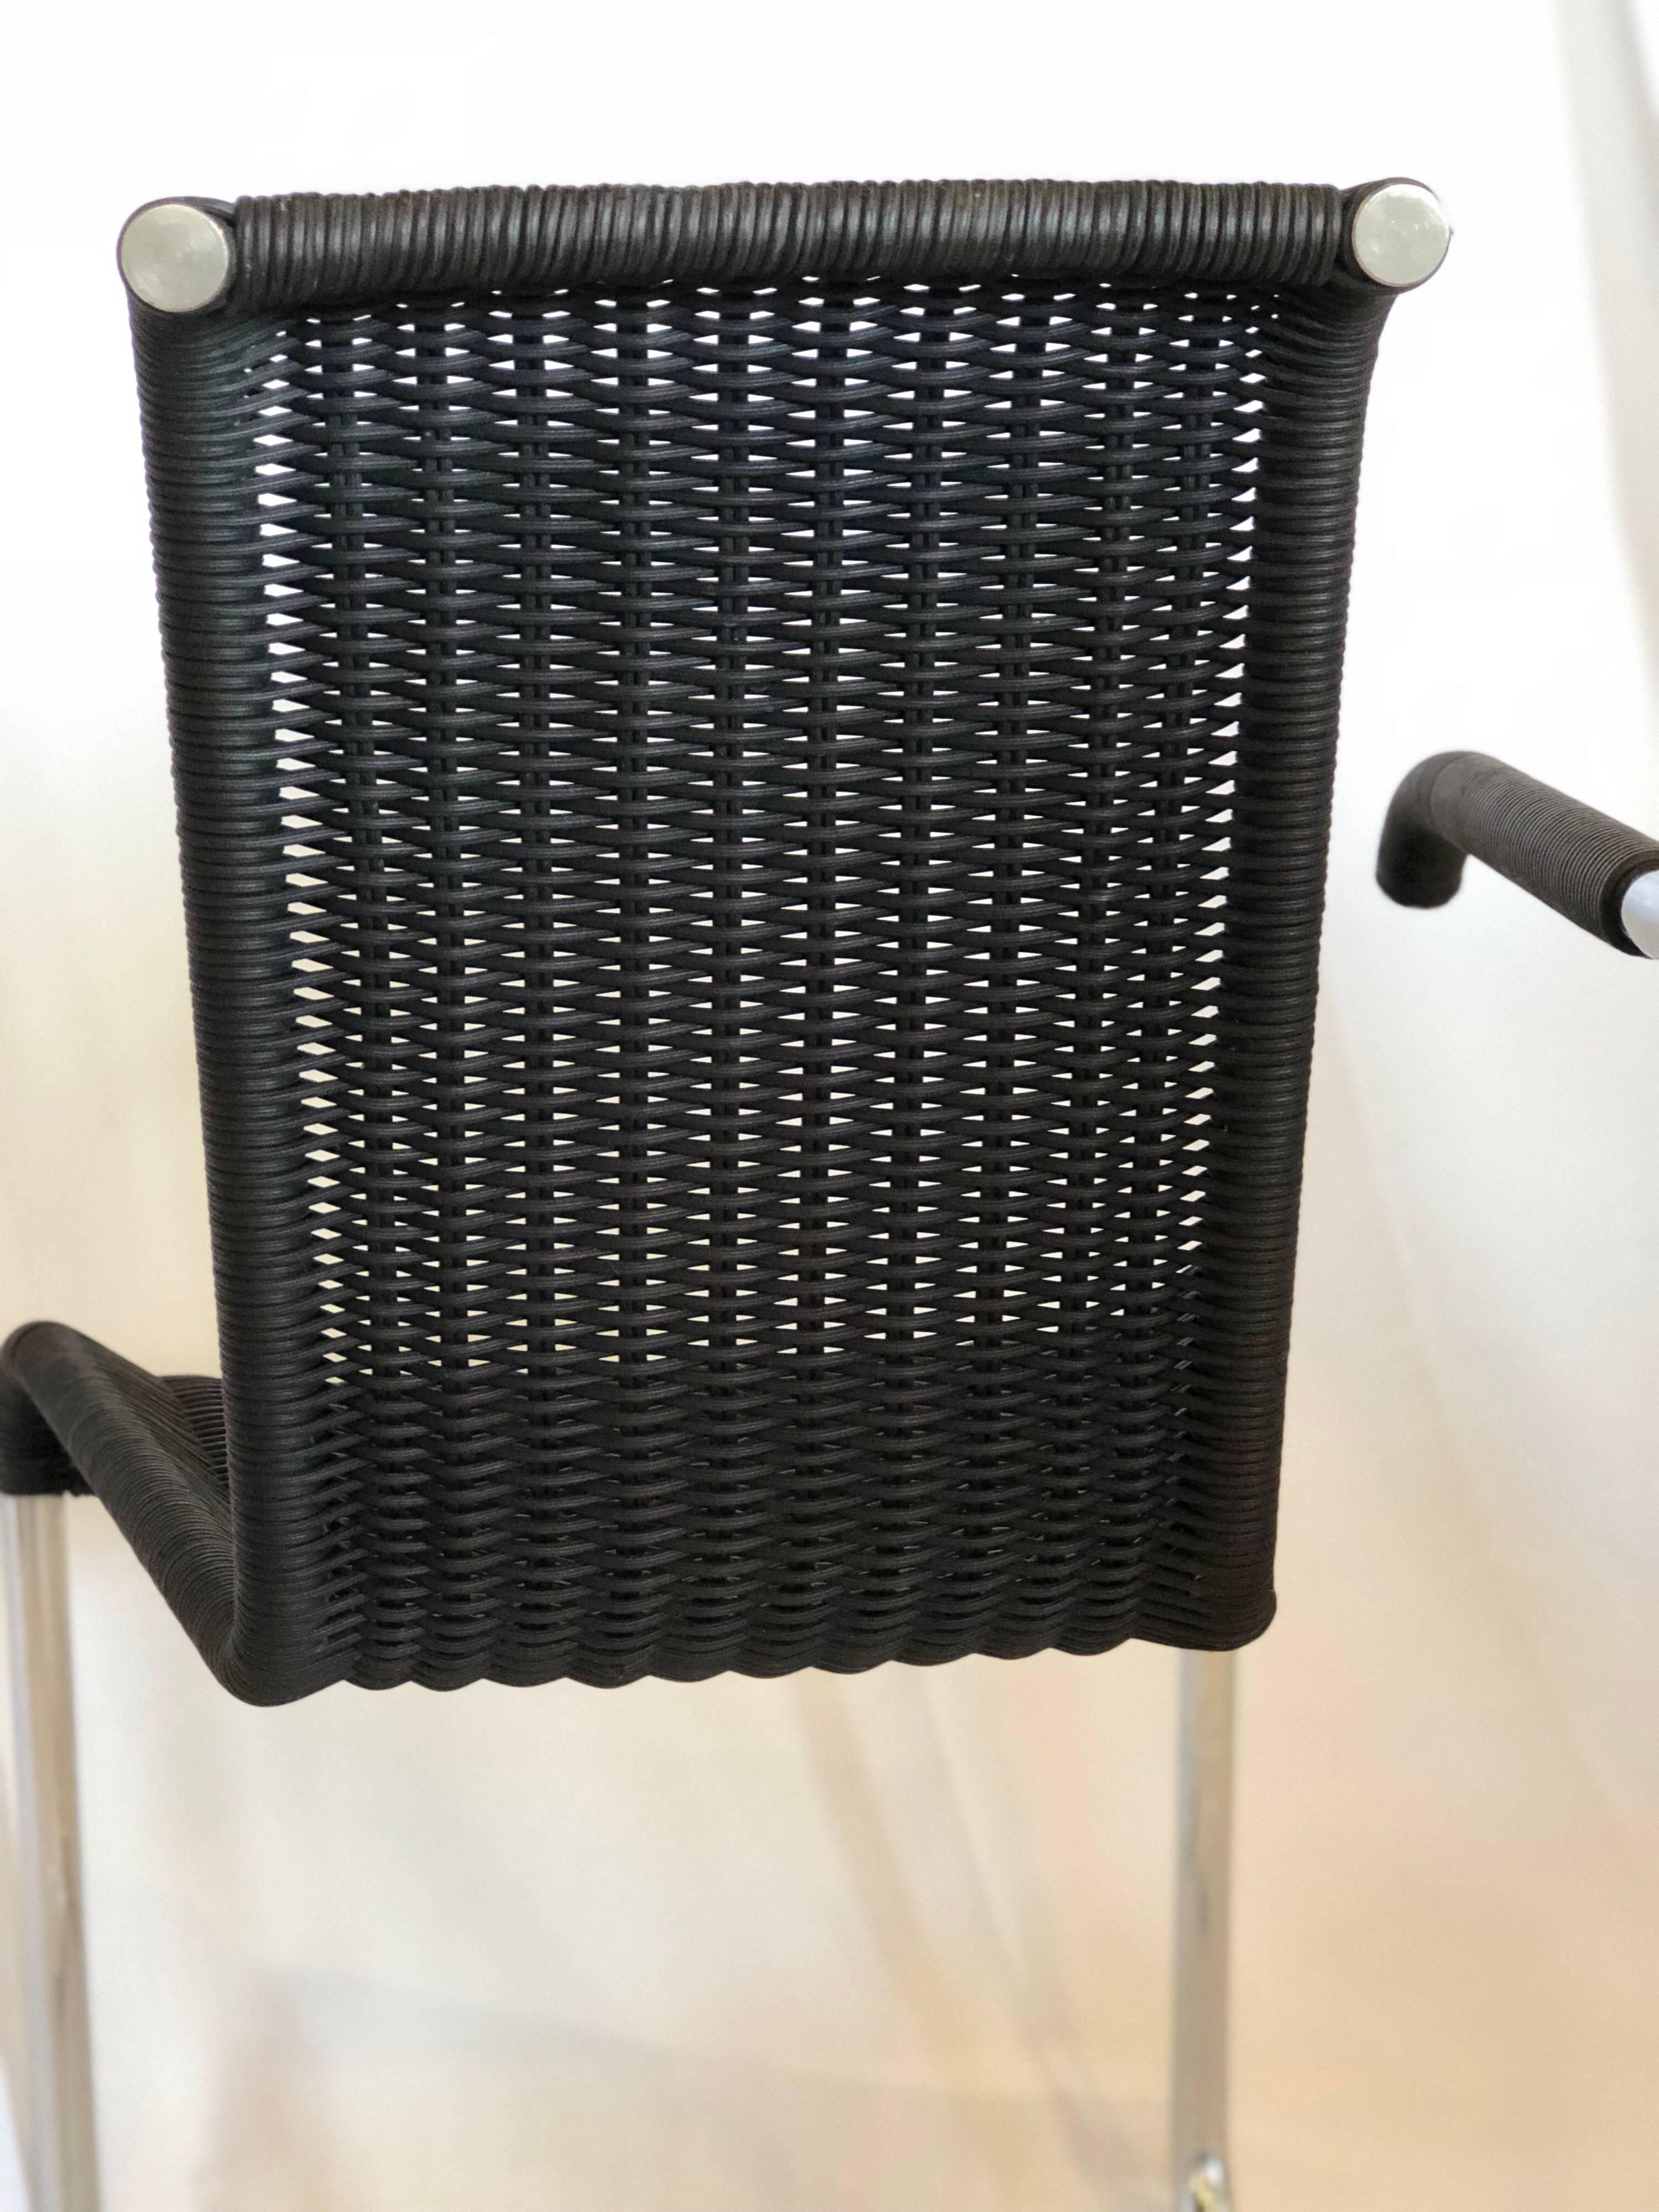 Jean Prouvé D20 Stainless Steel Leather Wicker Chairs for Tecta, Germany, 1980s For Sale 3